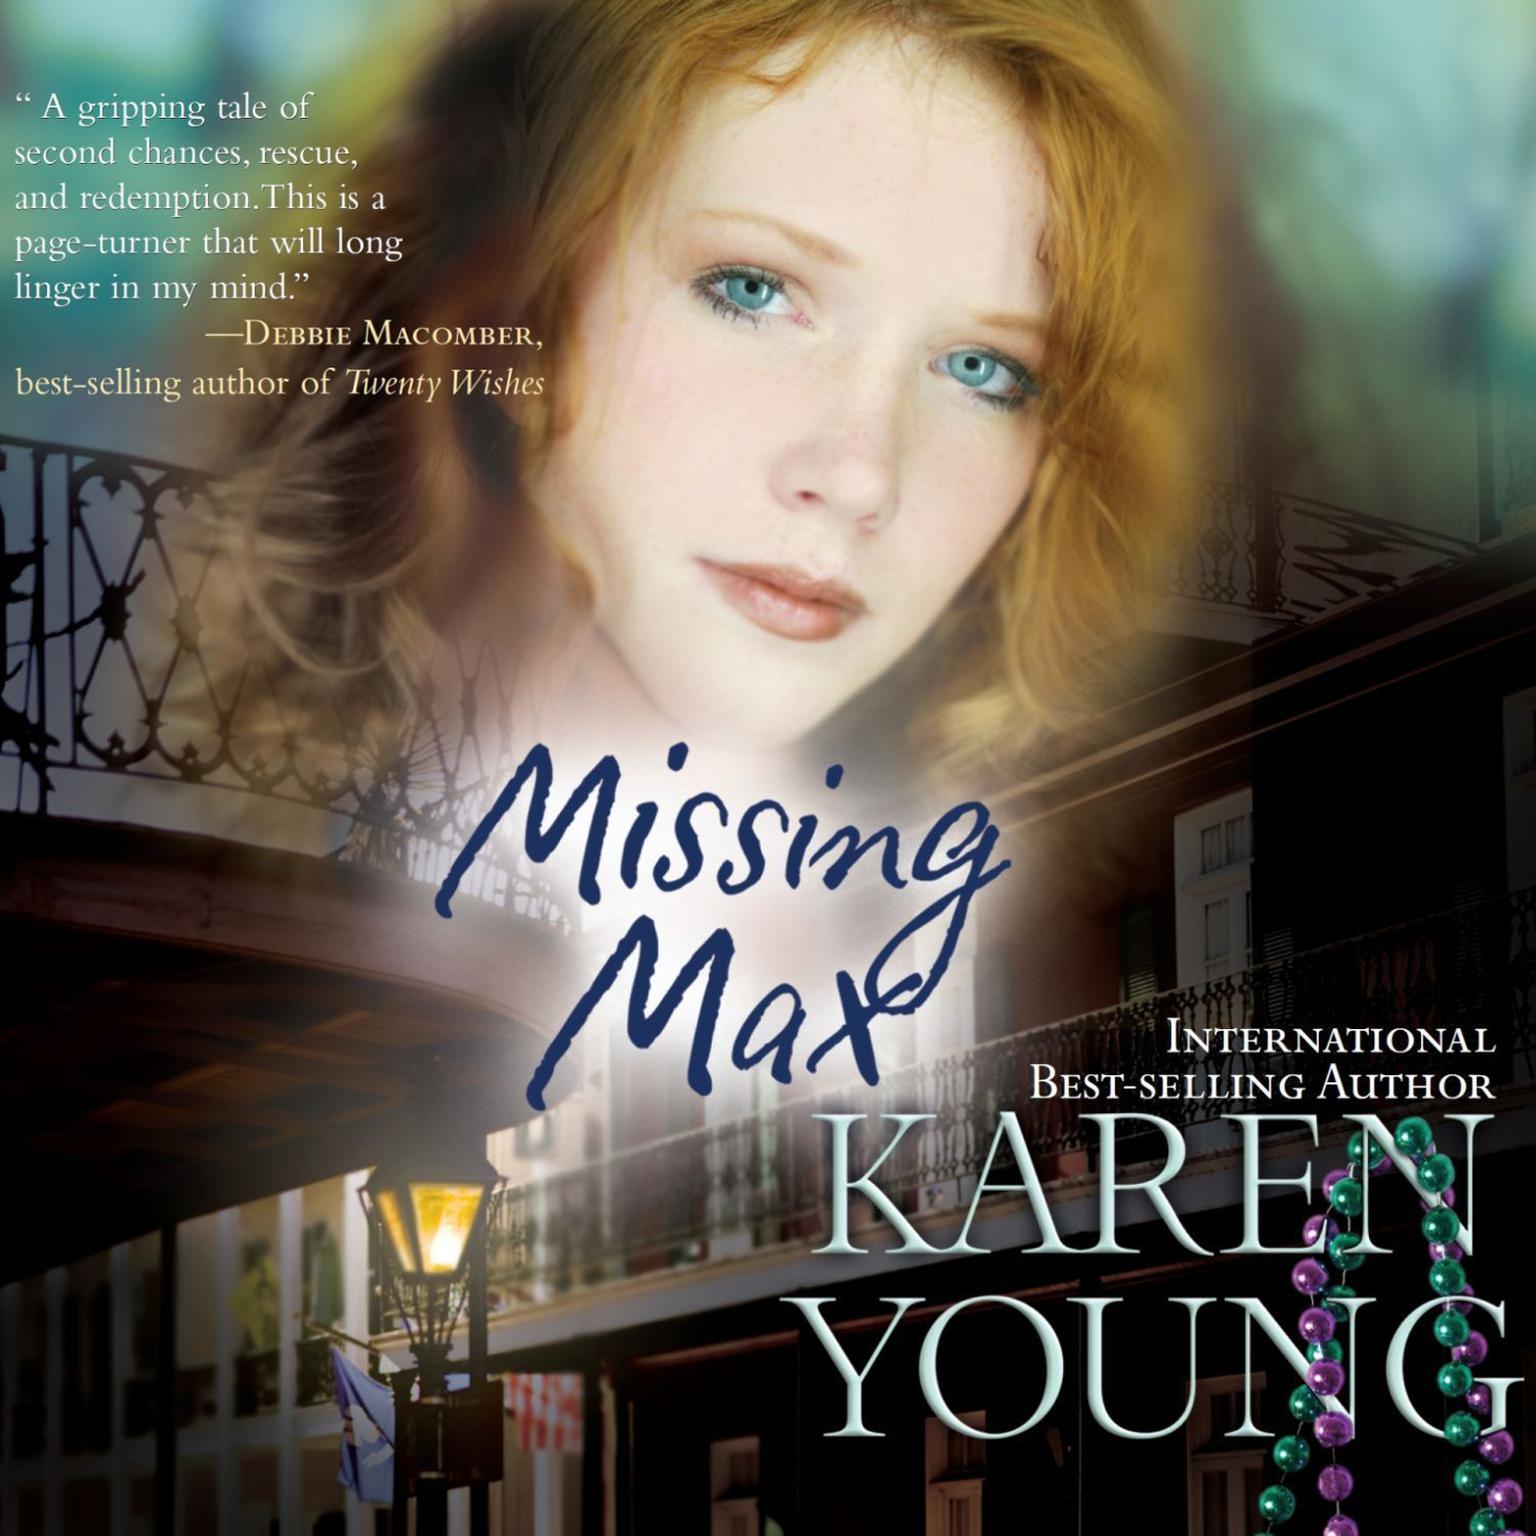 Missing Max: A Novel Audiobook, by Karen Young